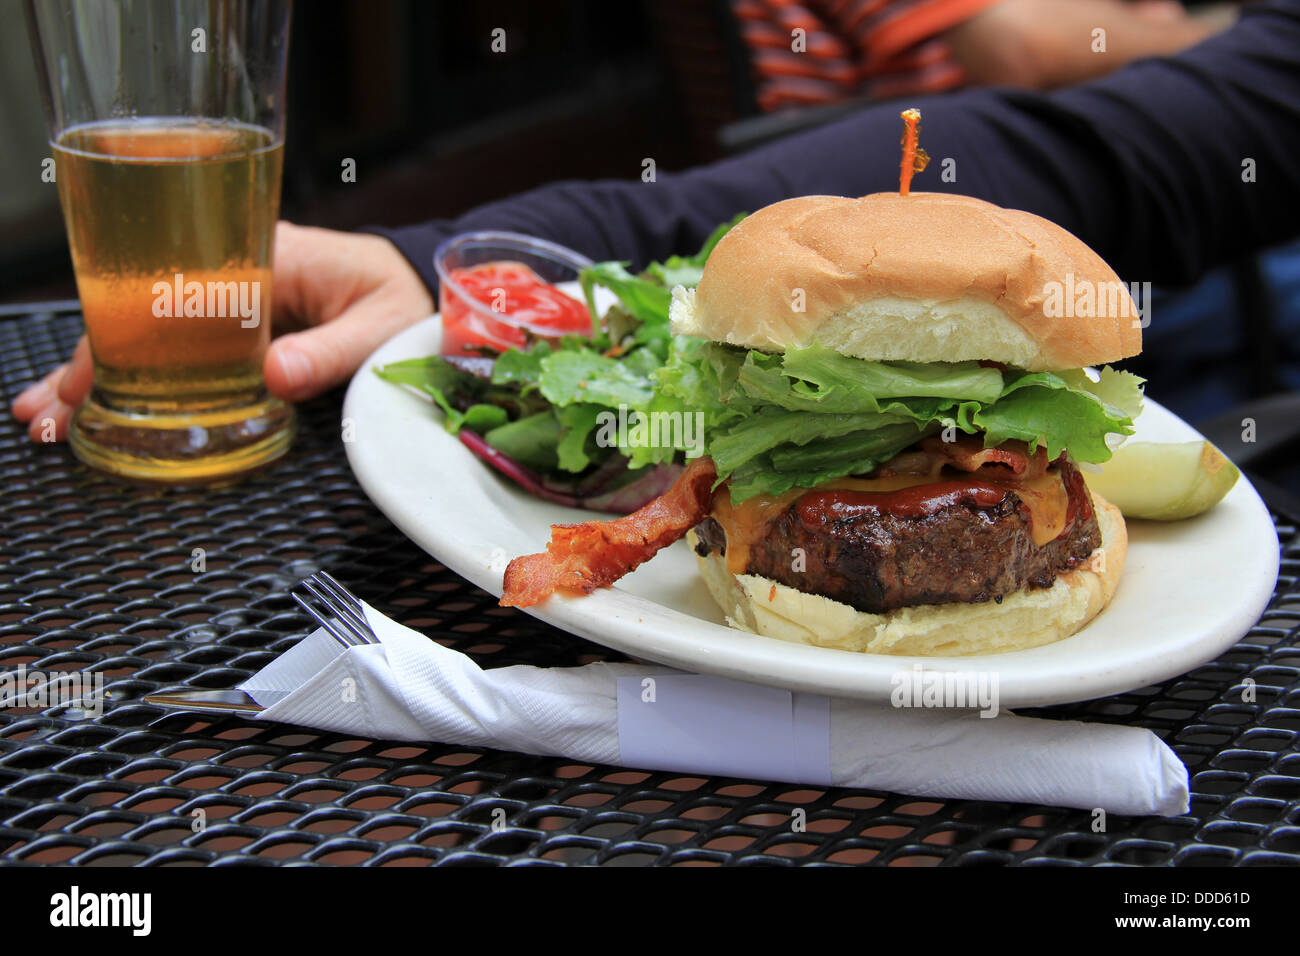 Delicious bacon cheeseburger piled high with lettuce,side salad,pickle and chilled beer makes a great lunch at local brewery on a hot summer's day. Stock Photo